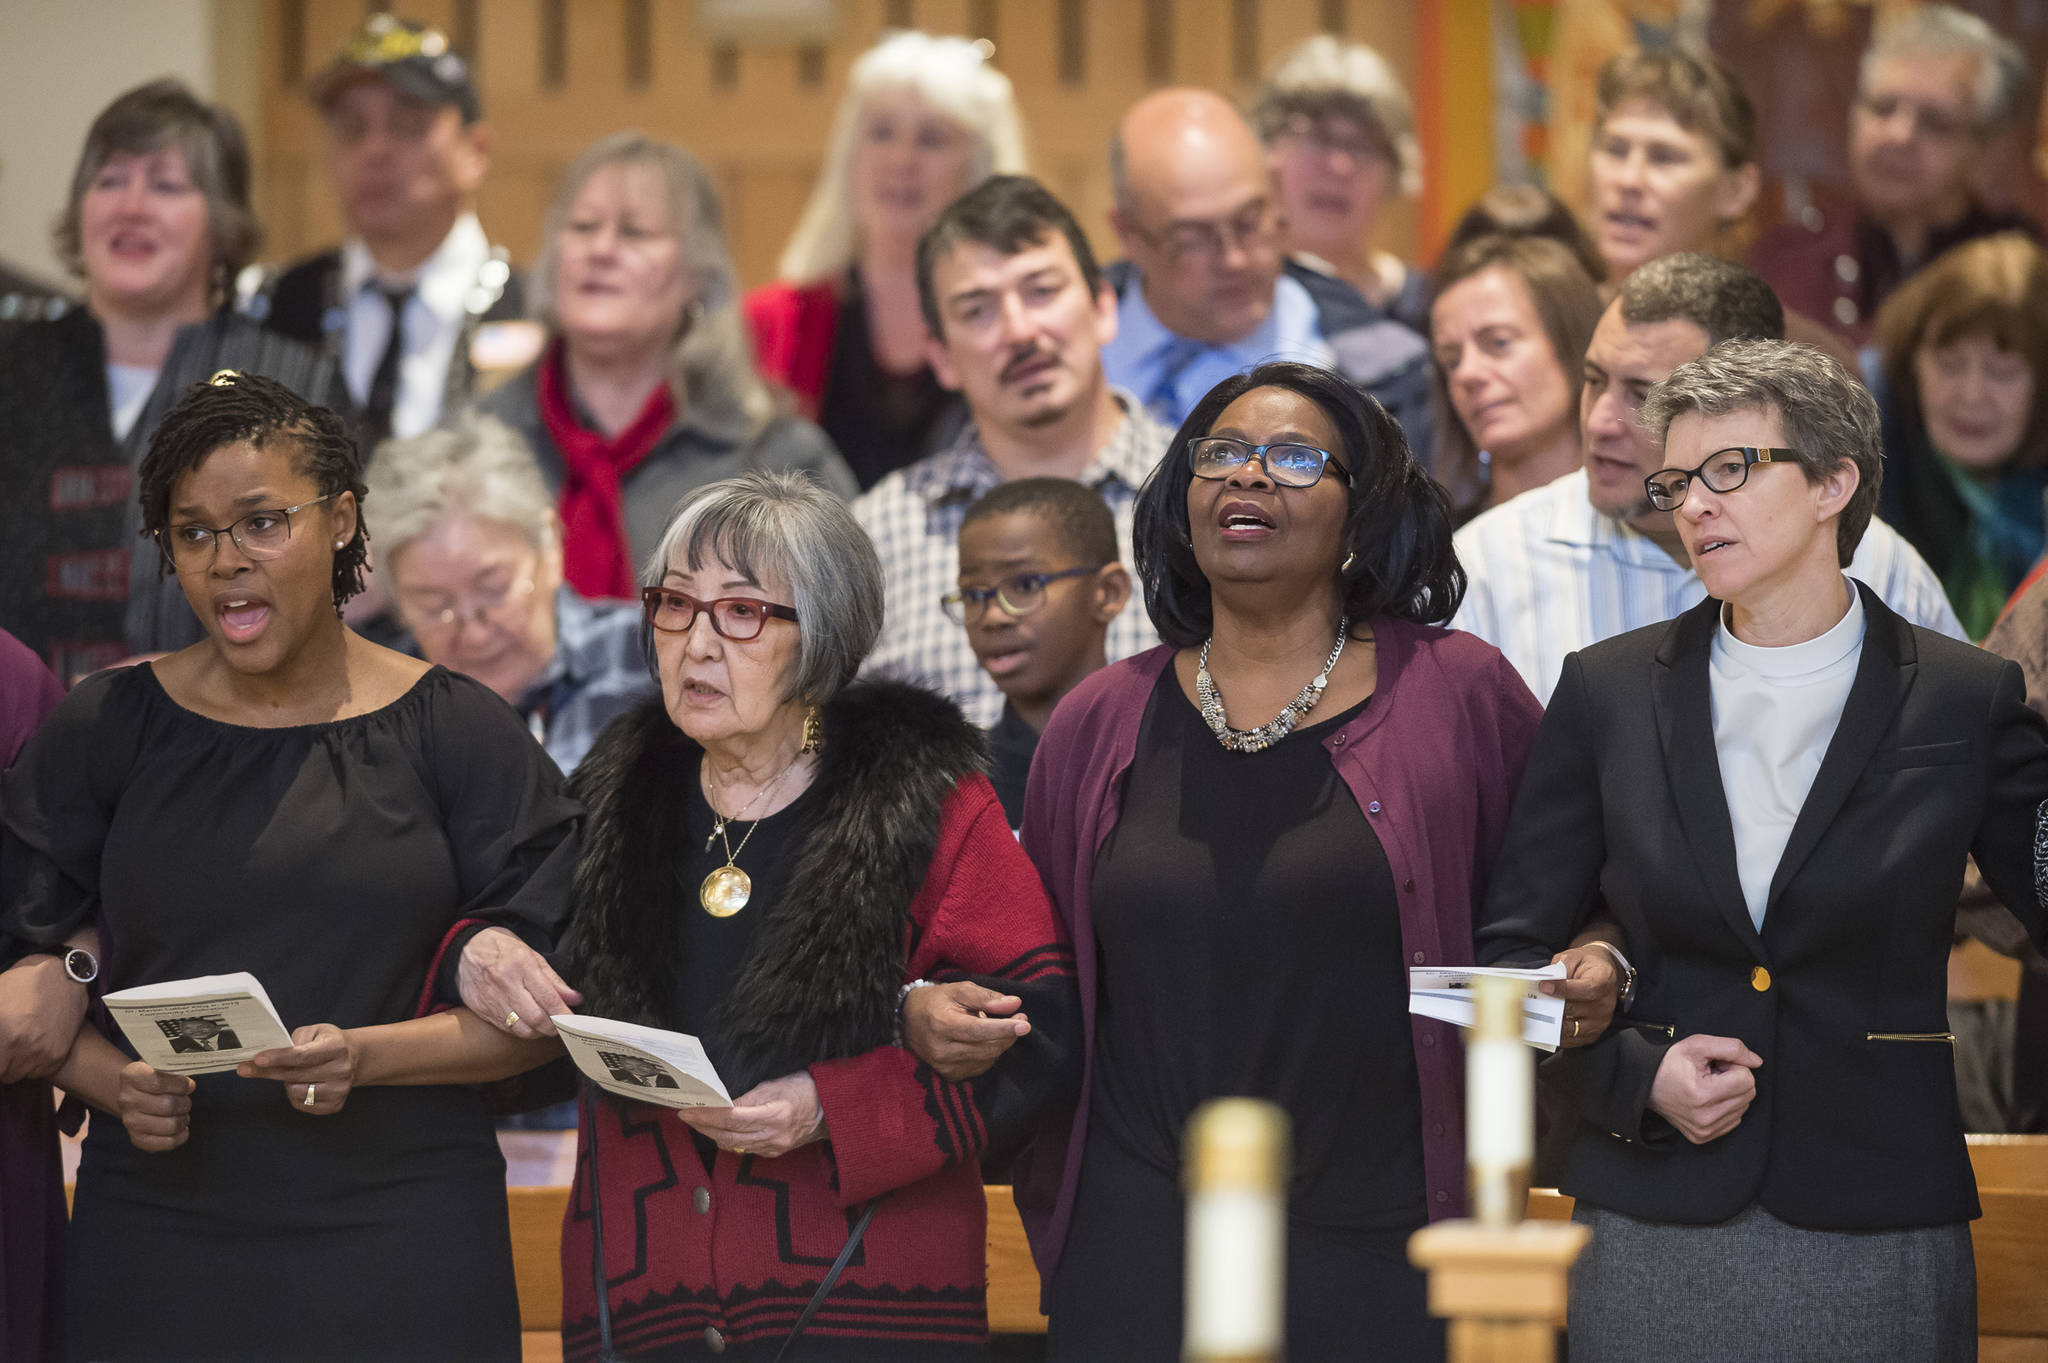 Juneau residents link arms as they sing “We Shall Overcome” at the Dr. Martin Luther King Jr. 2019 Community Celebration at St. Paul’s Catholic Church on Monday, Jan. 21, 2019. In the front row from left are: Latarsha McQueen, of the Black Awareness Association, Dr. Rosita Worl, president of the Sealaska Heritage Institute, Michelle Monts, former president of the Black Awareness Association, and Pastor Tari Stage-Harvey, of the Shepherd of the Valley Lutheran Church. (Michael Penn | Juneau Empire)